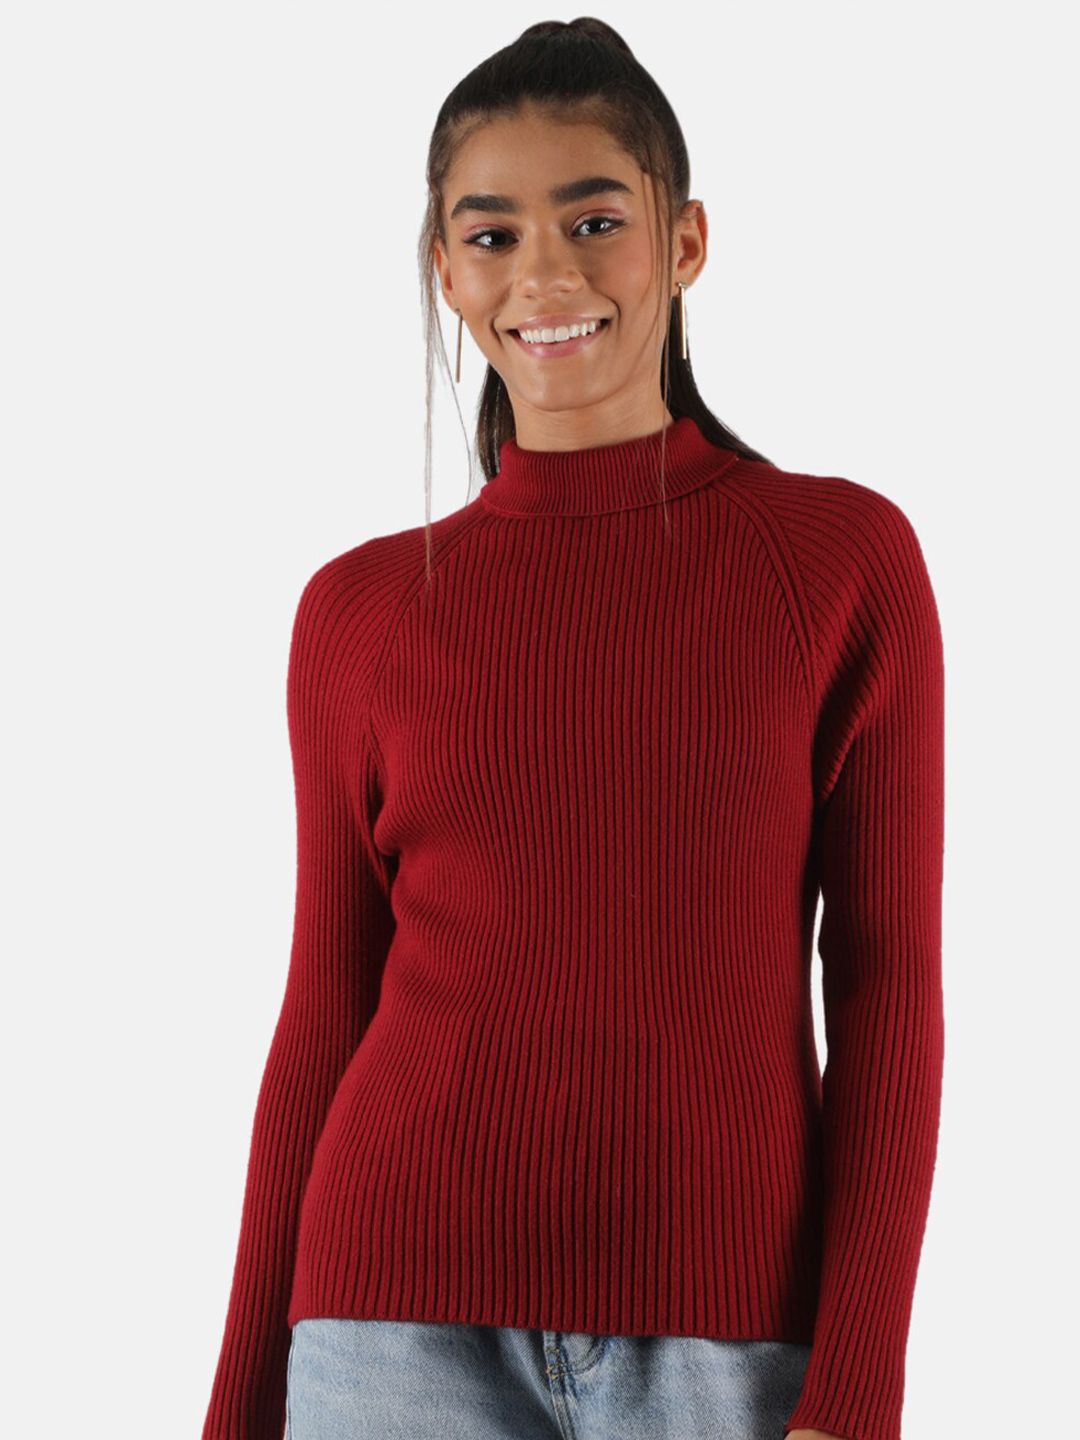 Monte Carlo Women's Blend Wool Maroon Solid High Neck Sceavy Top Price in India